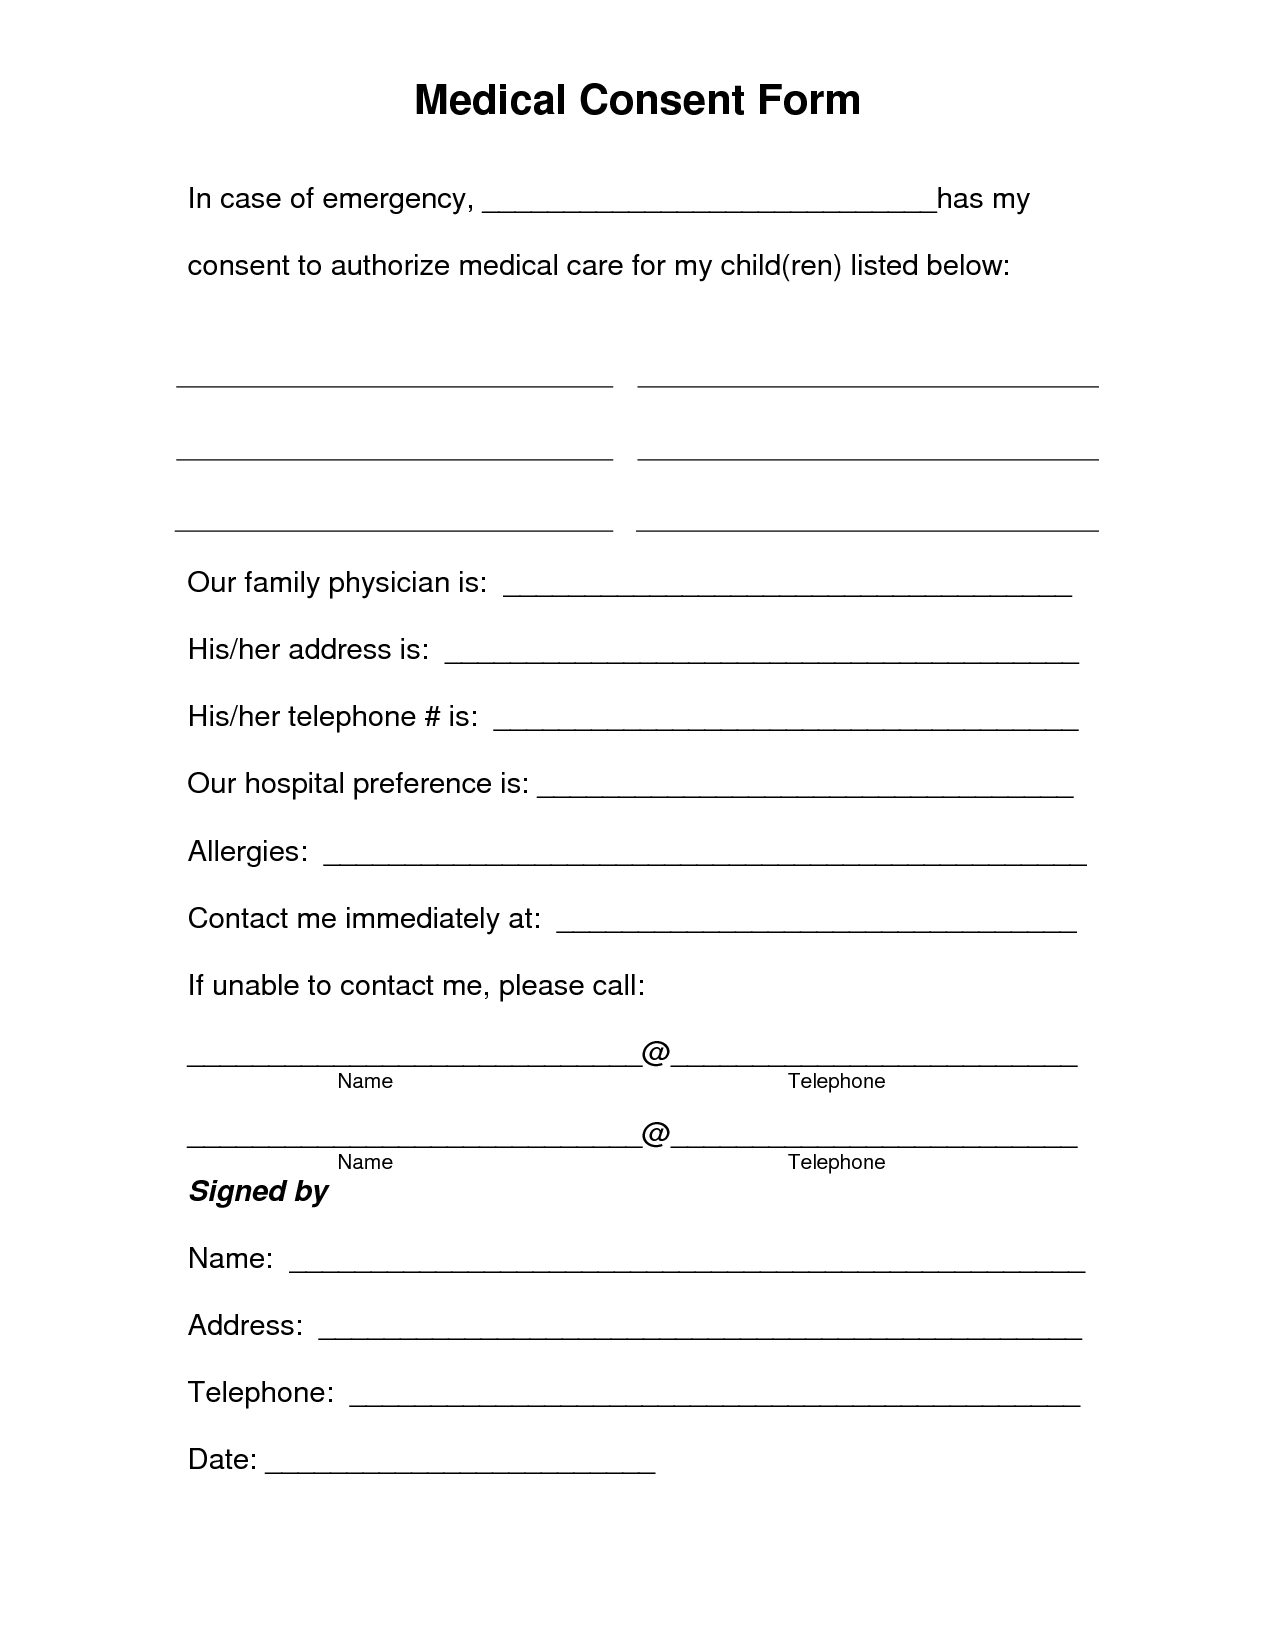 Free Printable Medical Consent Form | Free Medical Consent Form - Free Printable Medical Release Form